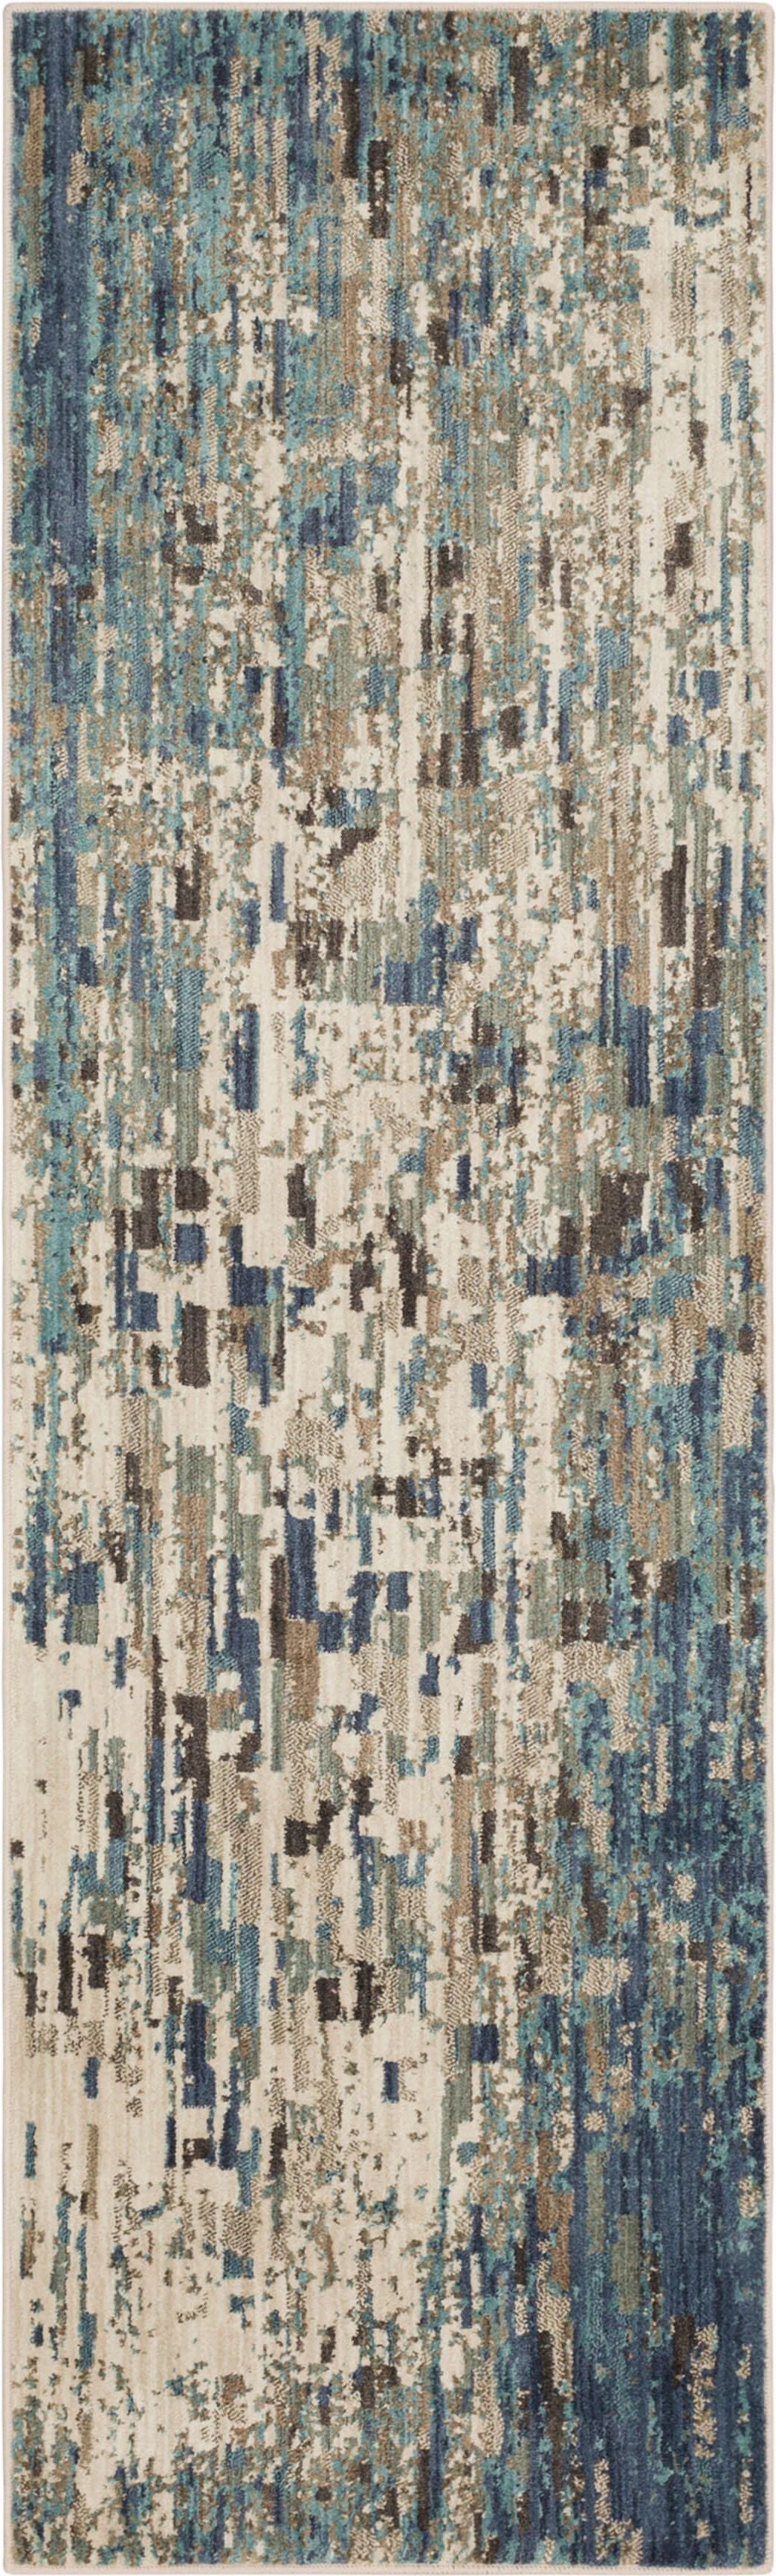 Scott Living Expressions by Scott Living 91676 Lagoon  Modern/Contemporary Machinemade Rug